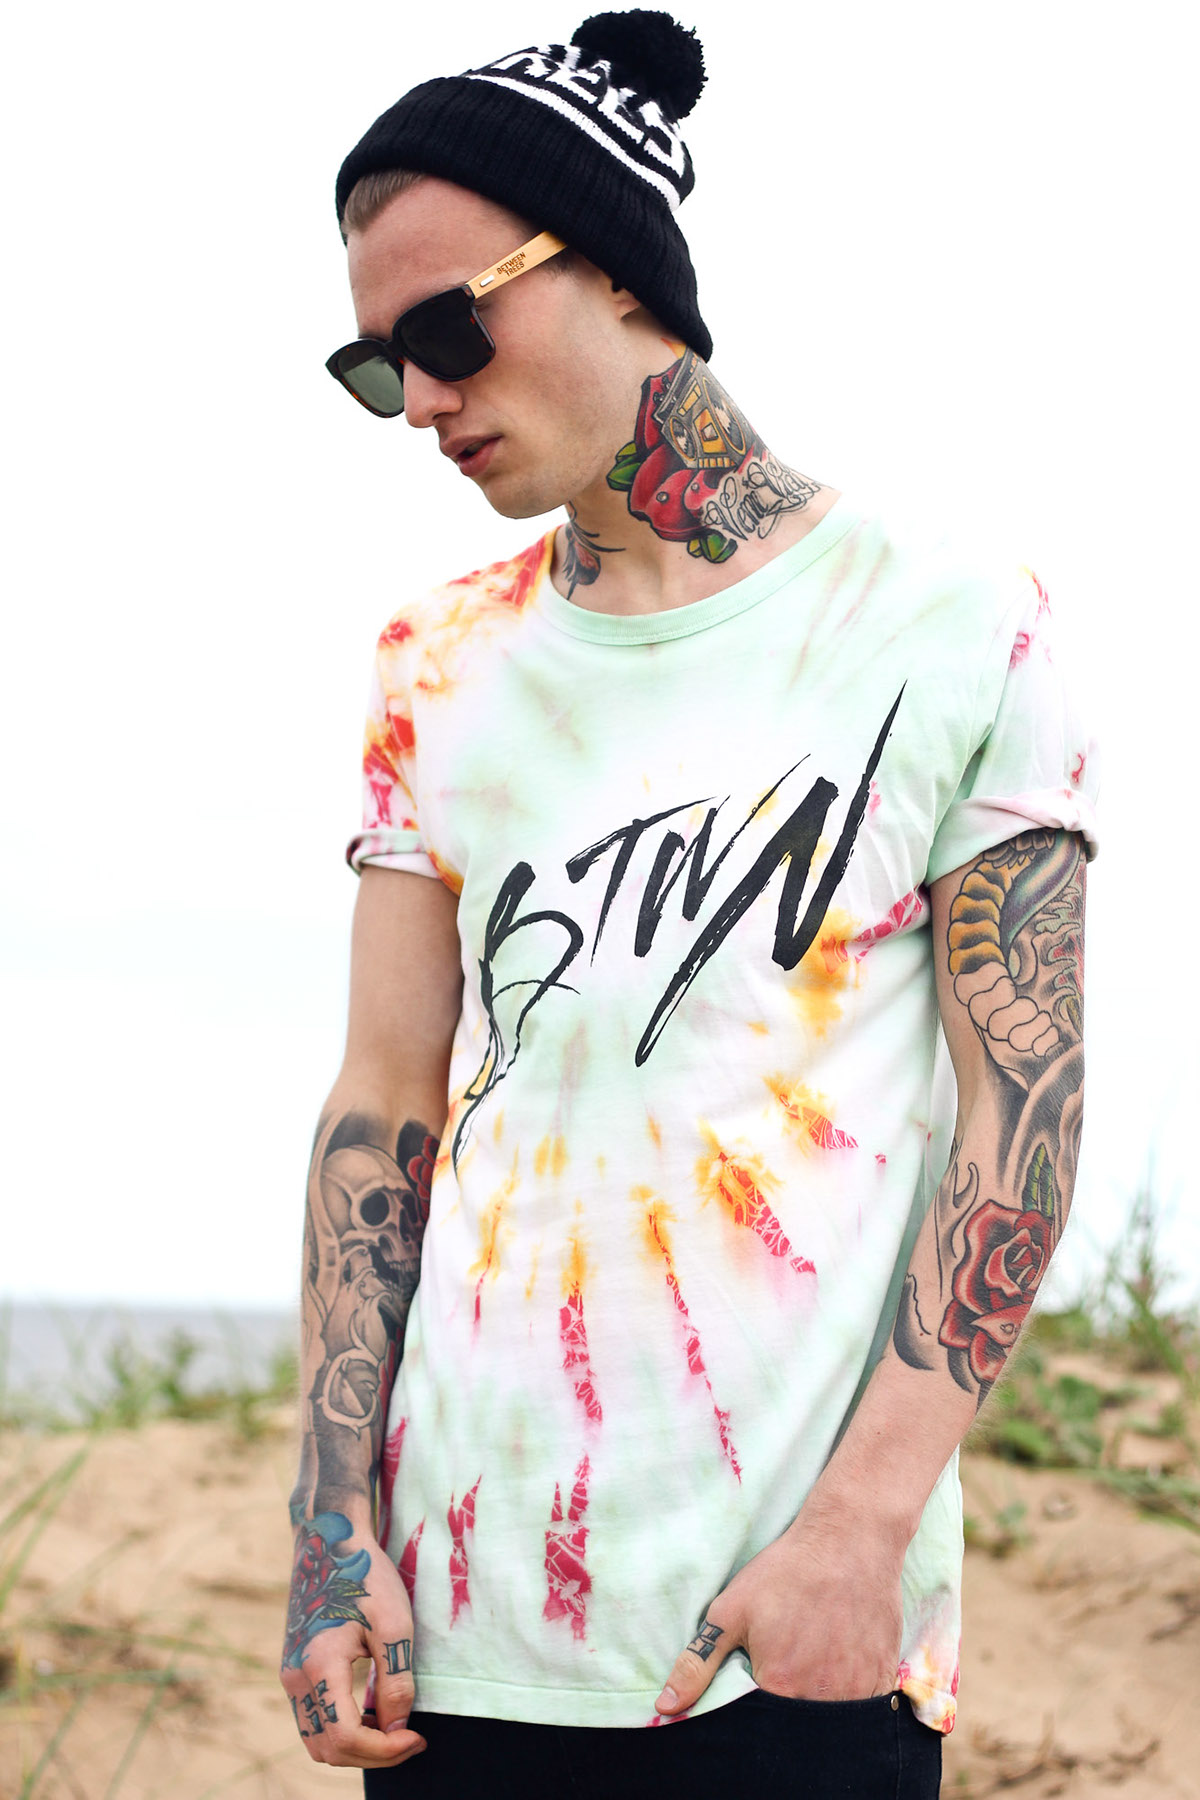 Clothing  fashion Tie-Dye Tie Dye t-shirt tee Sunglasses iphone iphone case bamboo Hipster logo between trees btwn bmx